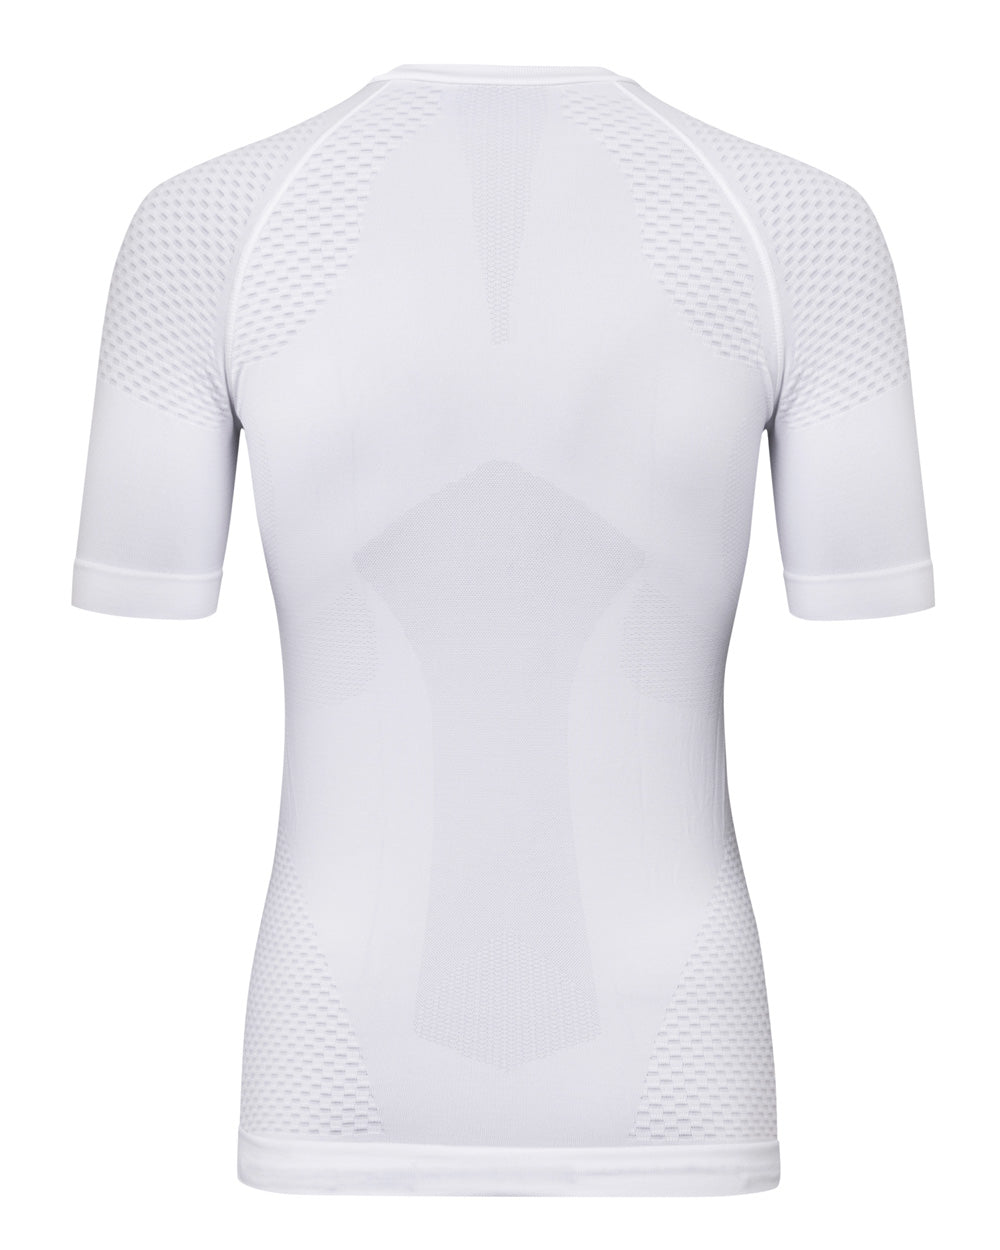 T-shirt FIR lady short sleeves - White - Medical Device triloxy